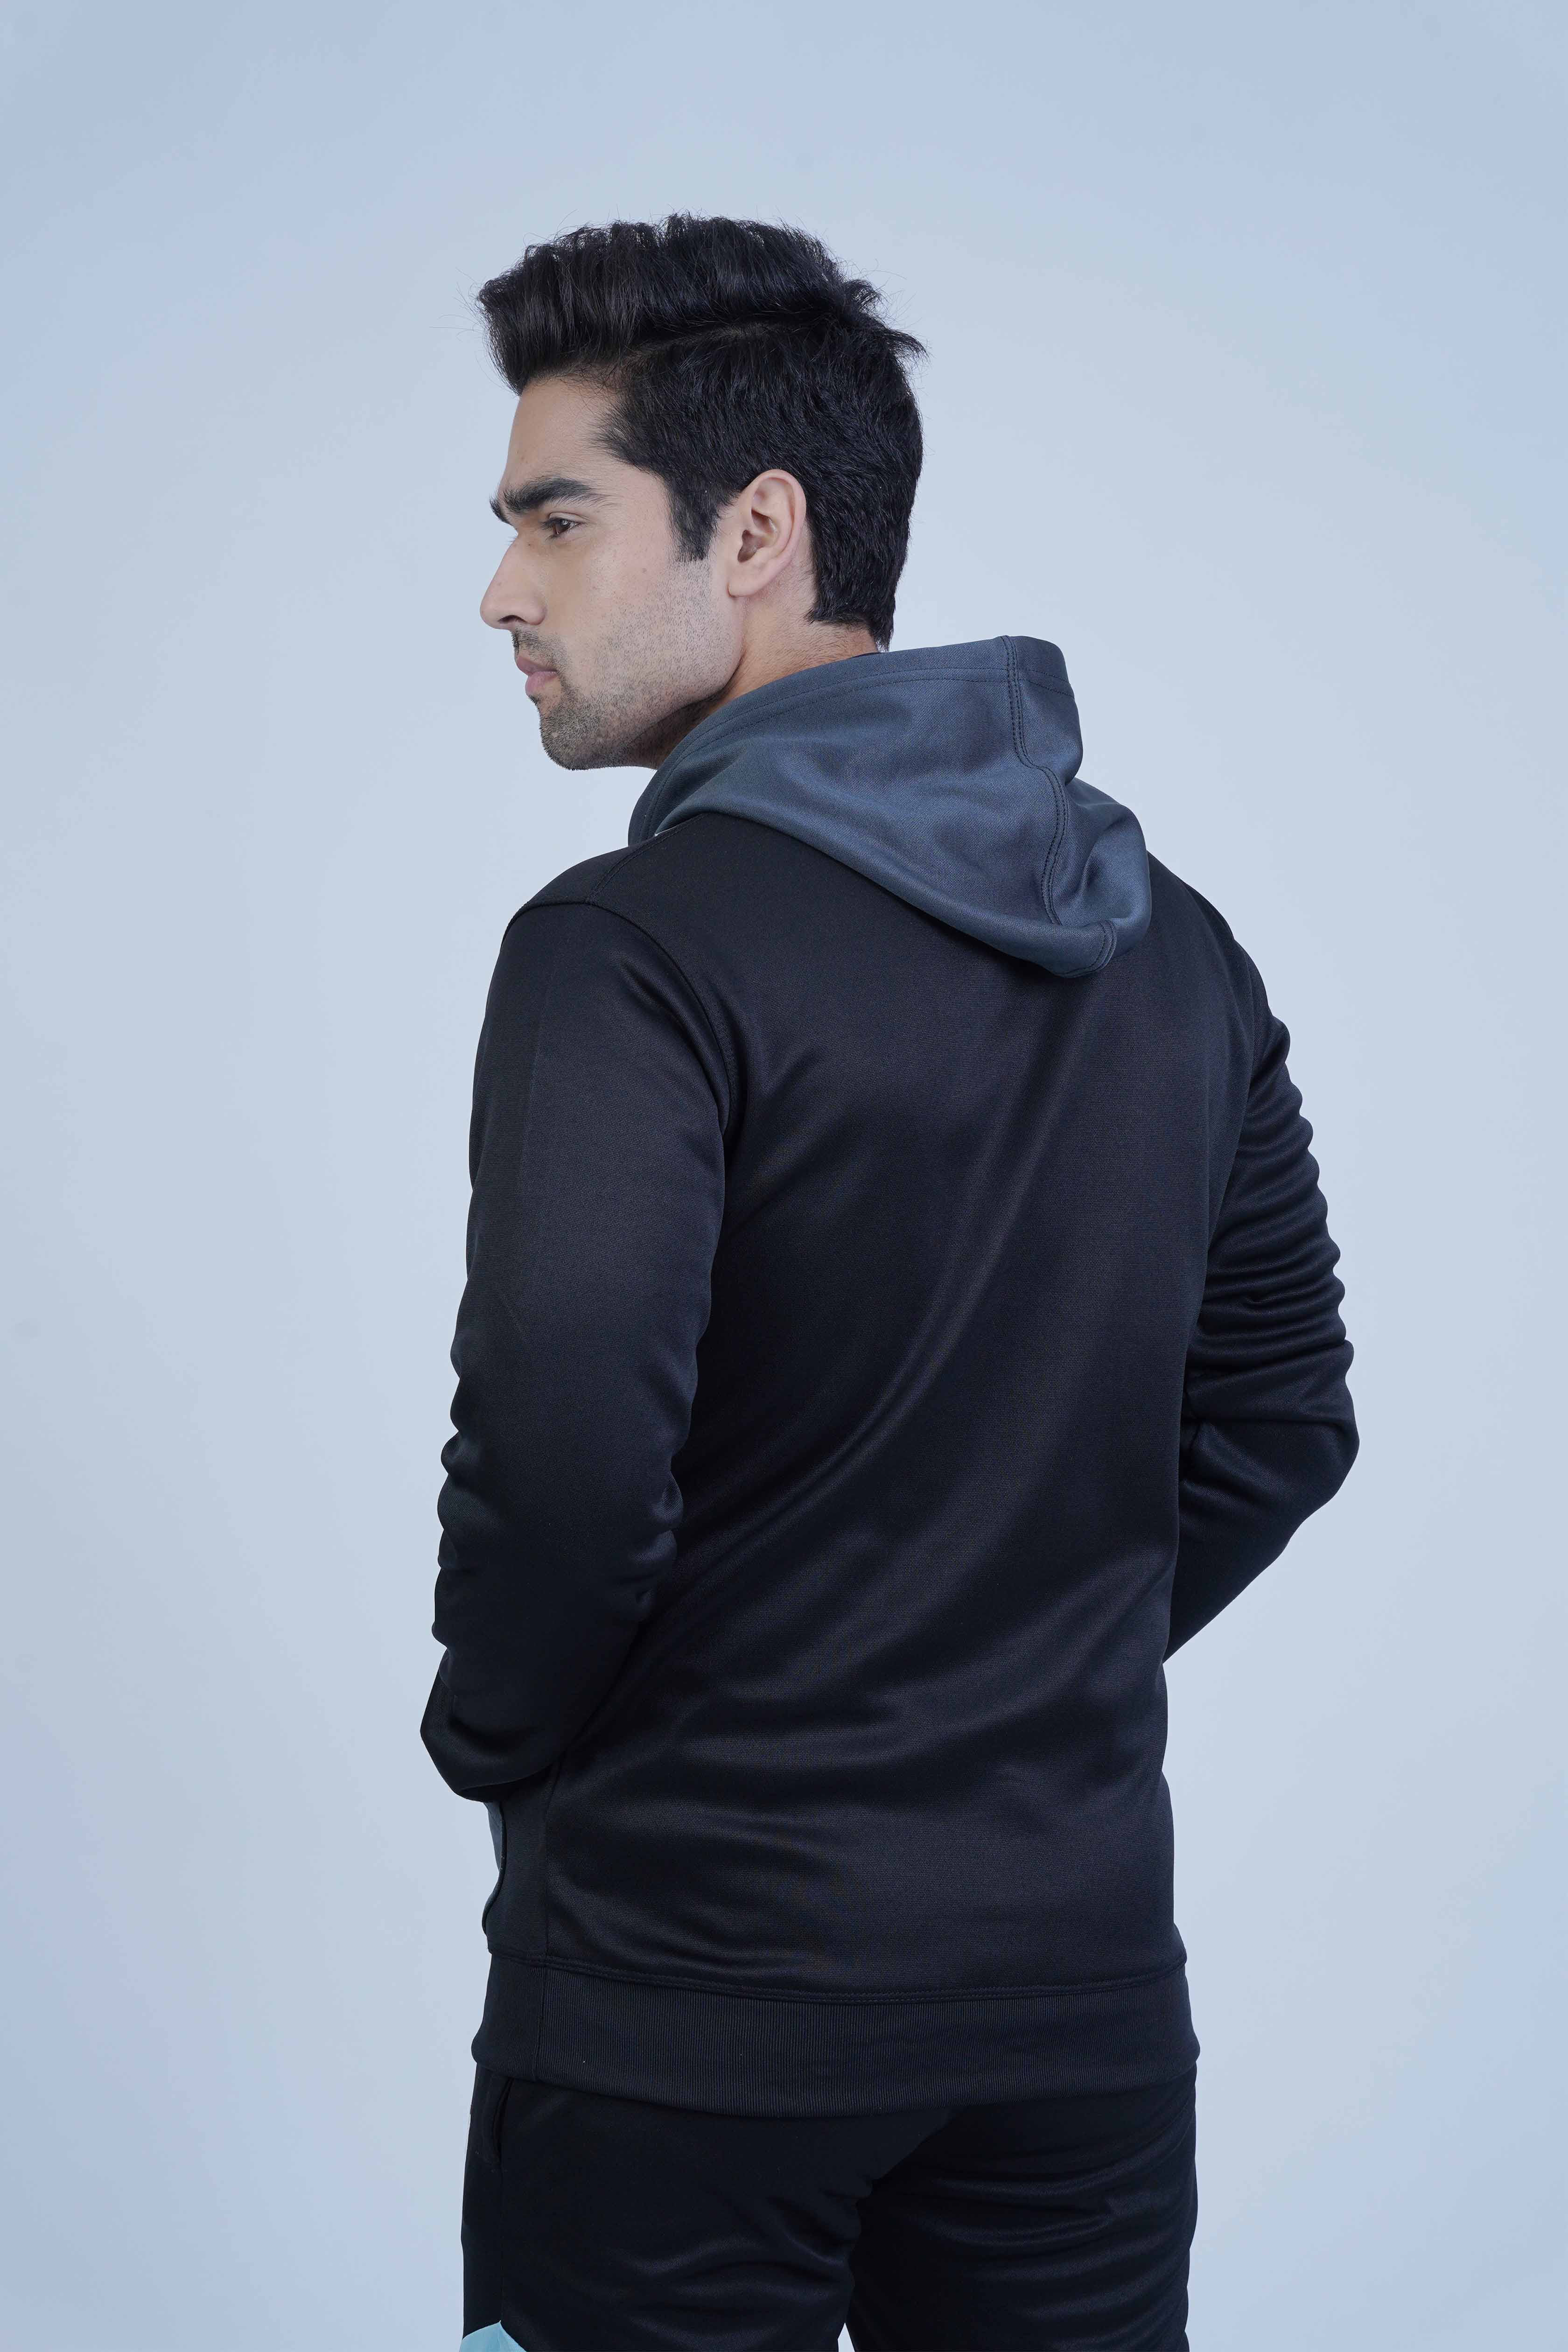 Relaxed Fit Black Hoodie by The Xea